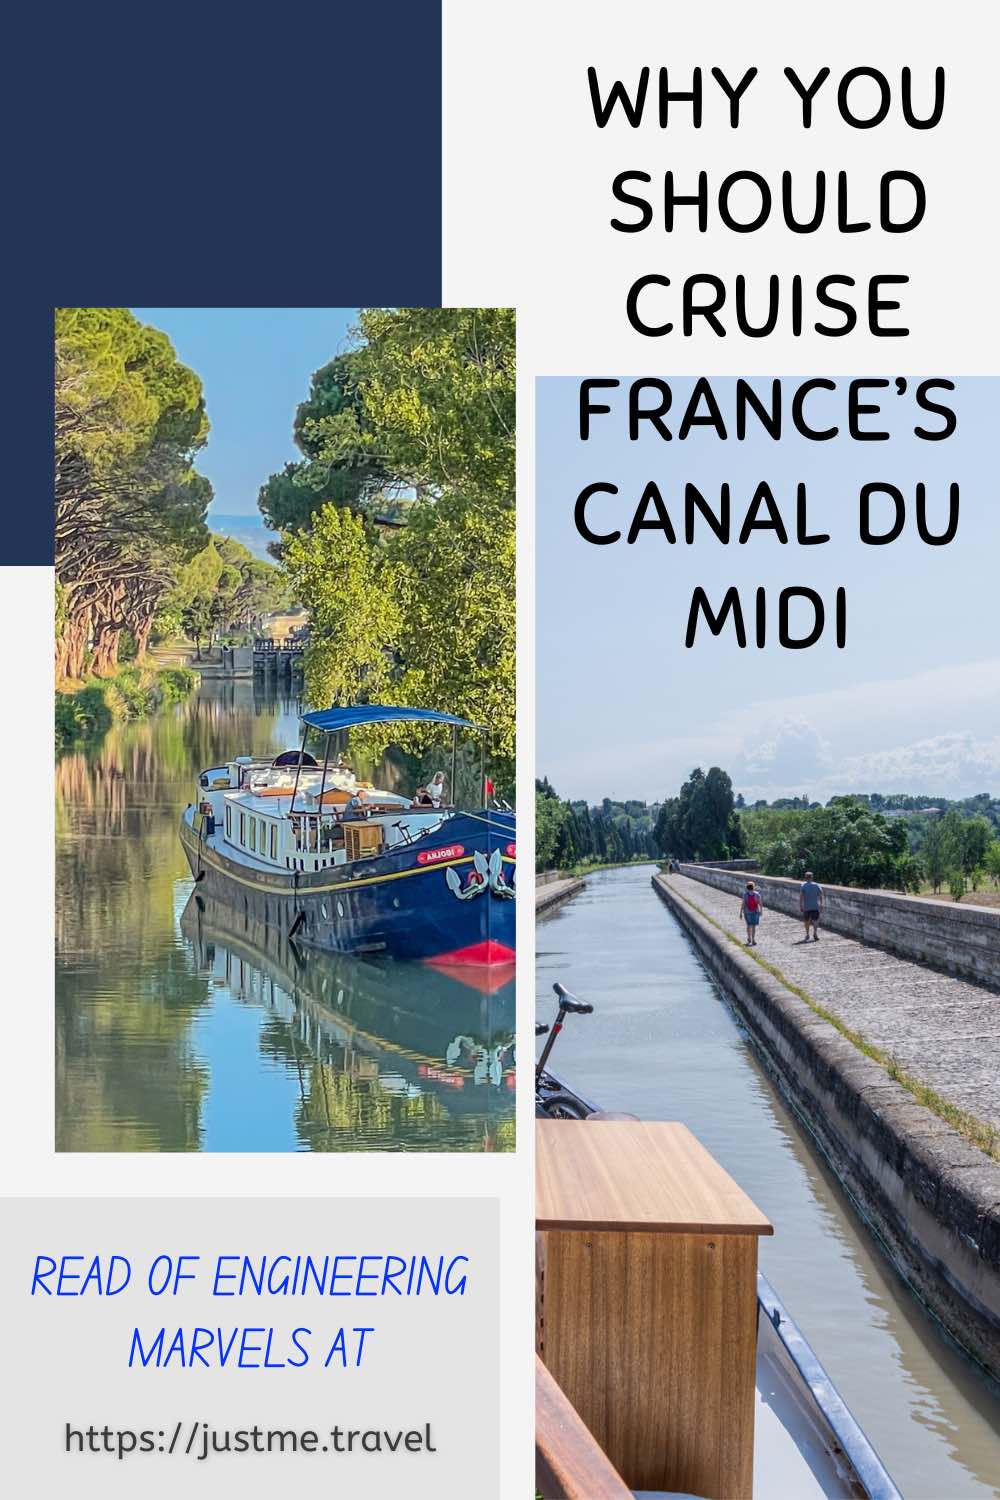 The image shows two photos. One photo is of a boat reflected in the waters of a tree-lined canal. The other photo is a boat sailing on an aqueduct (a water bridge). These are engineering marvels on the Canal du Midi.